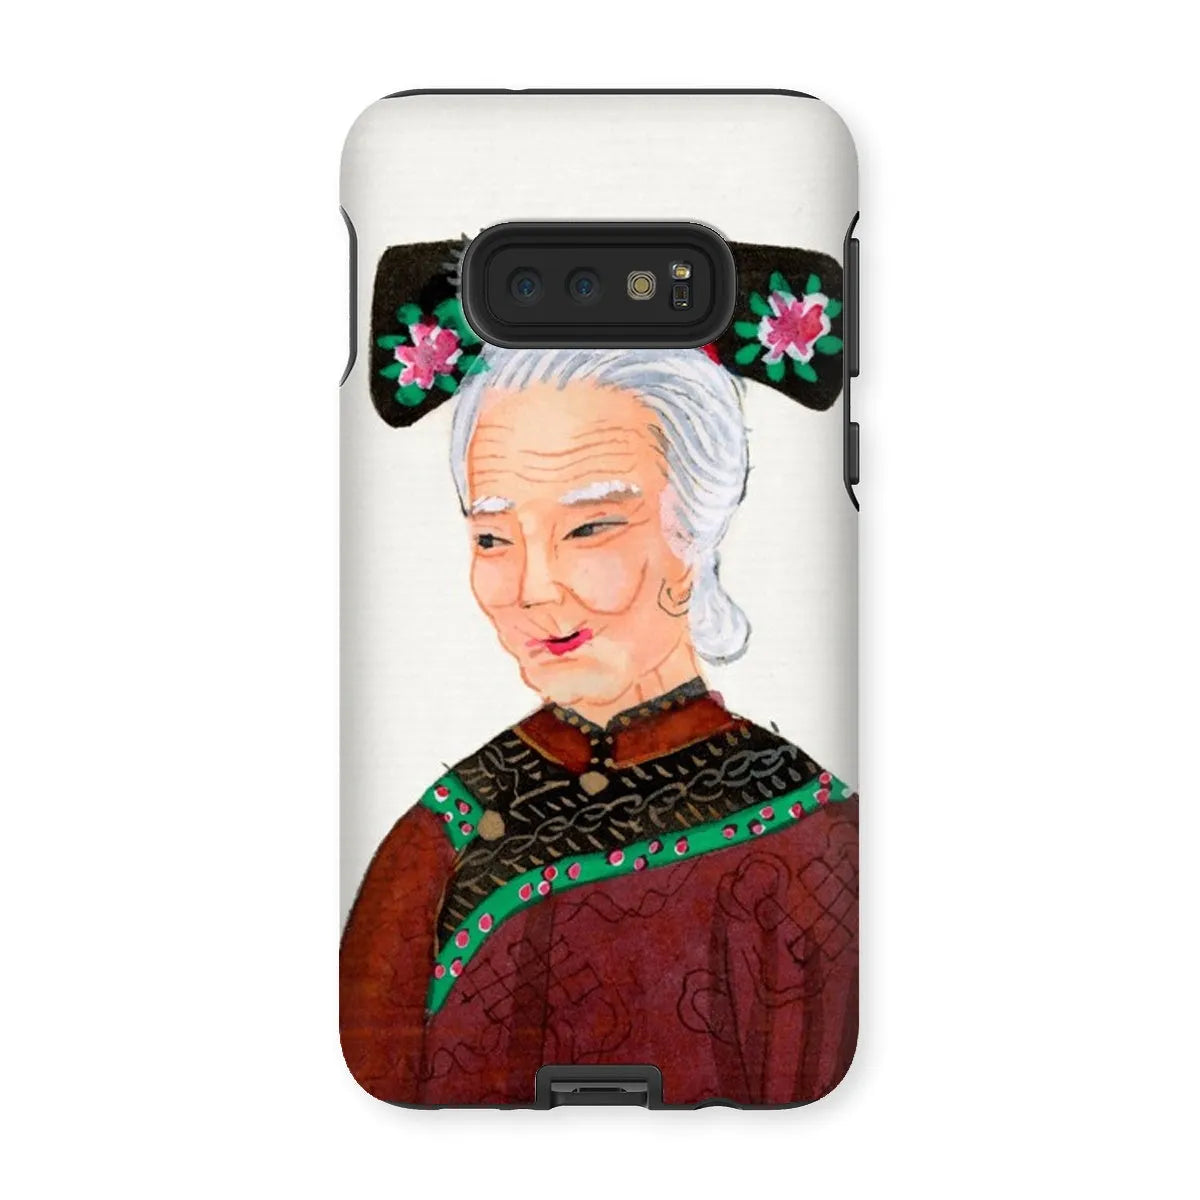 Grand Dame Too - Aesthetic Chinese Art Phone Case - Samsung Galaxy S10e / Matte - Mobile Phone Cases - Aesthetic Art